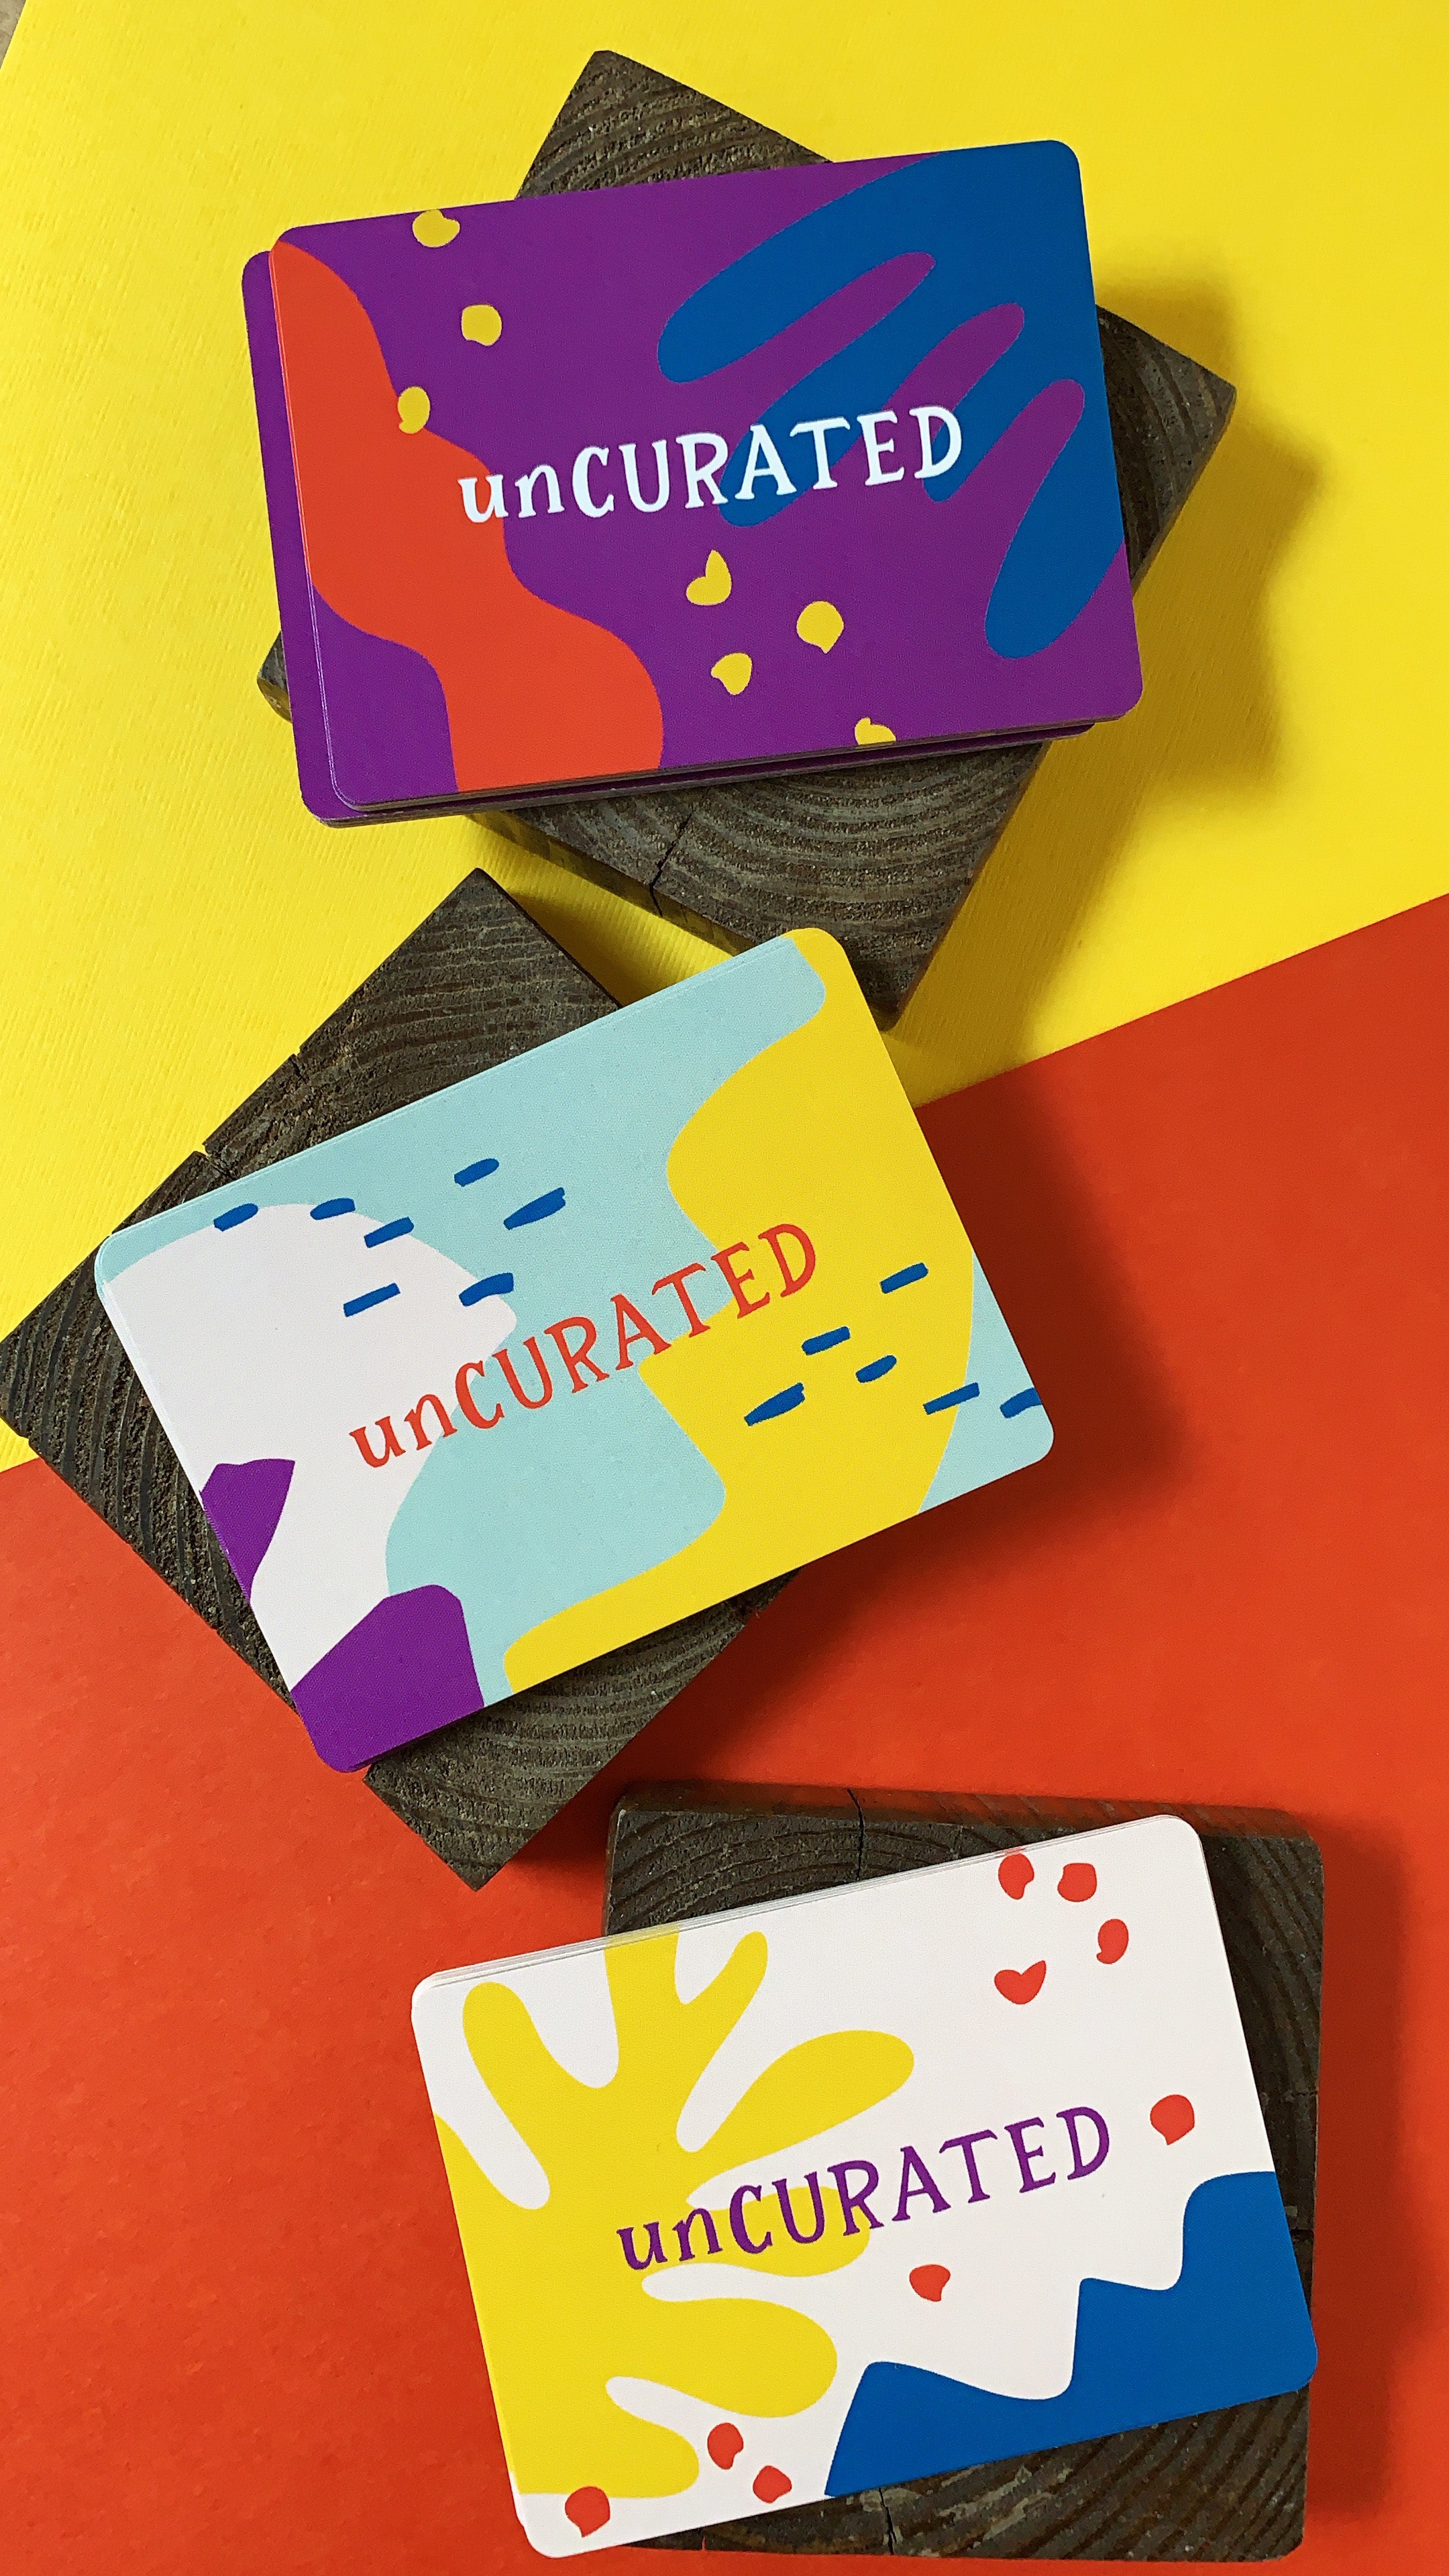 unCURATED - the card game that sparks meaningful conversations, connection, and emotional well-being, dinner party game for adults